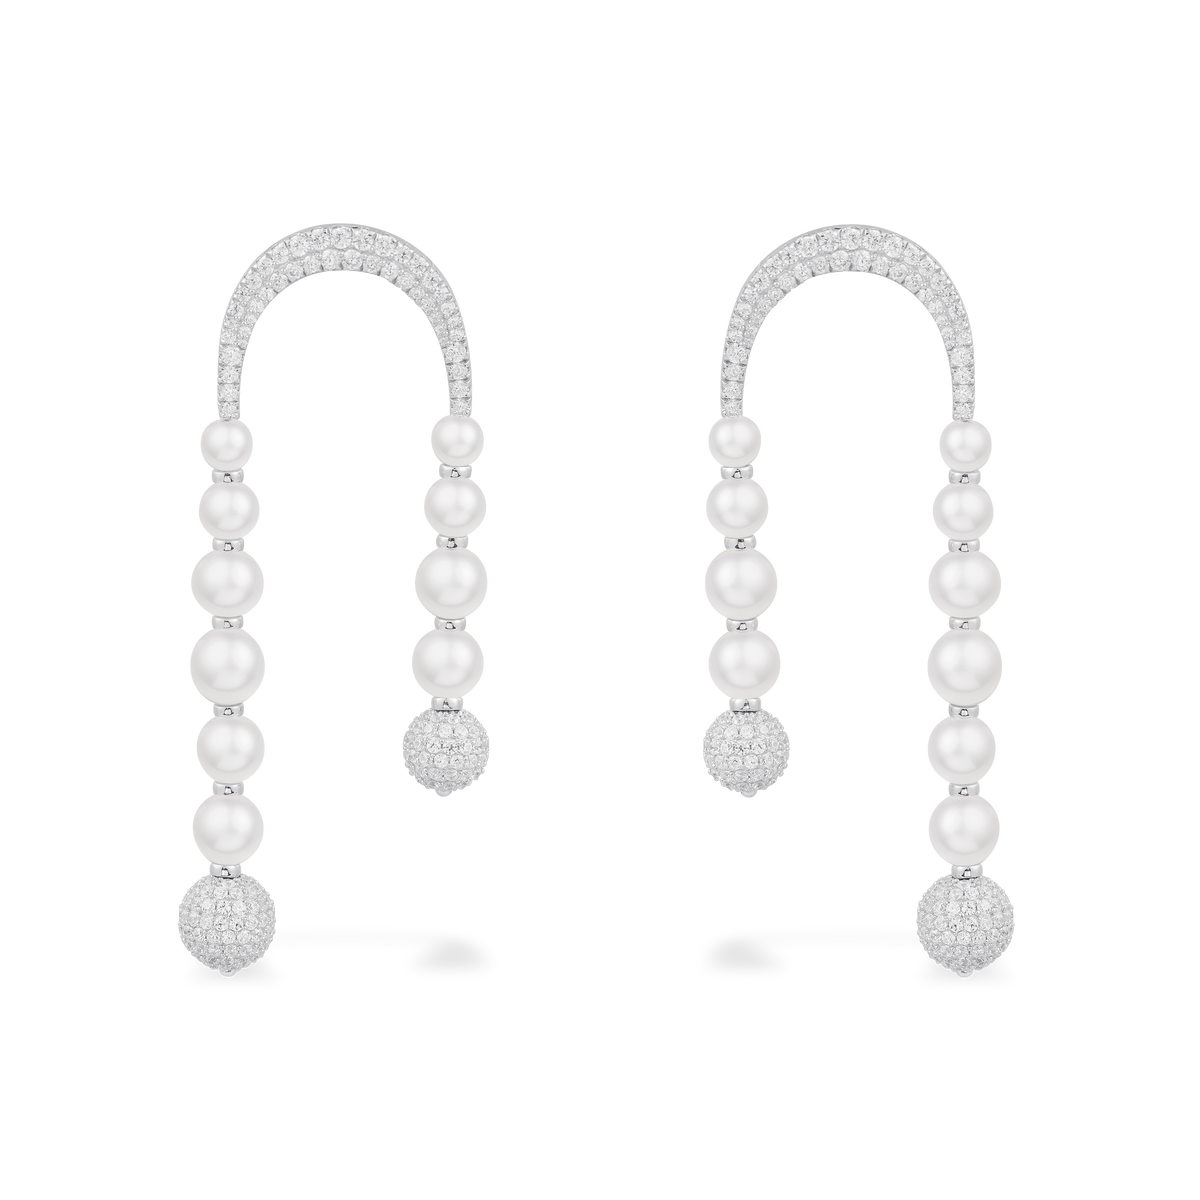 DISCO DROP EARRINGS WITH PEARLS - SILVER